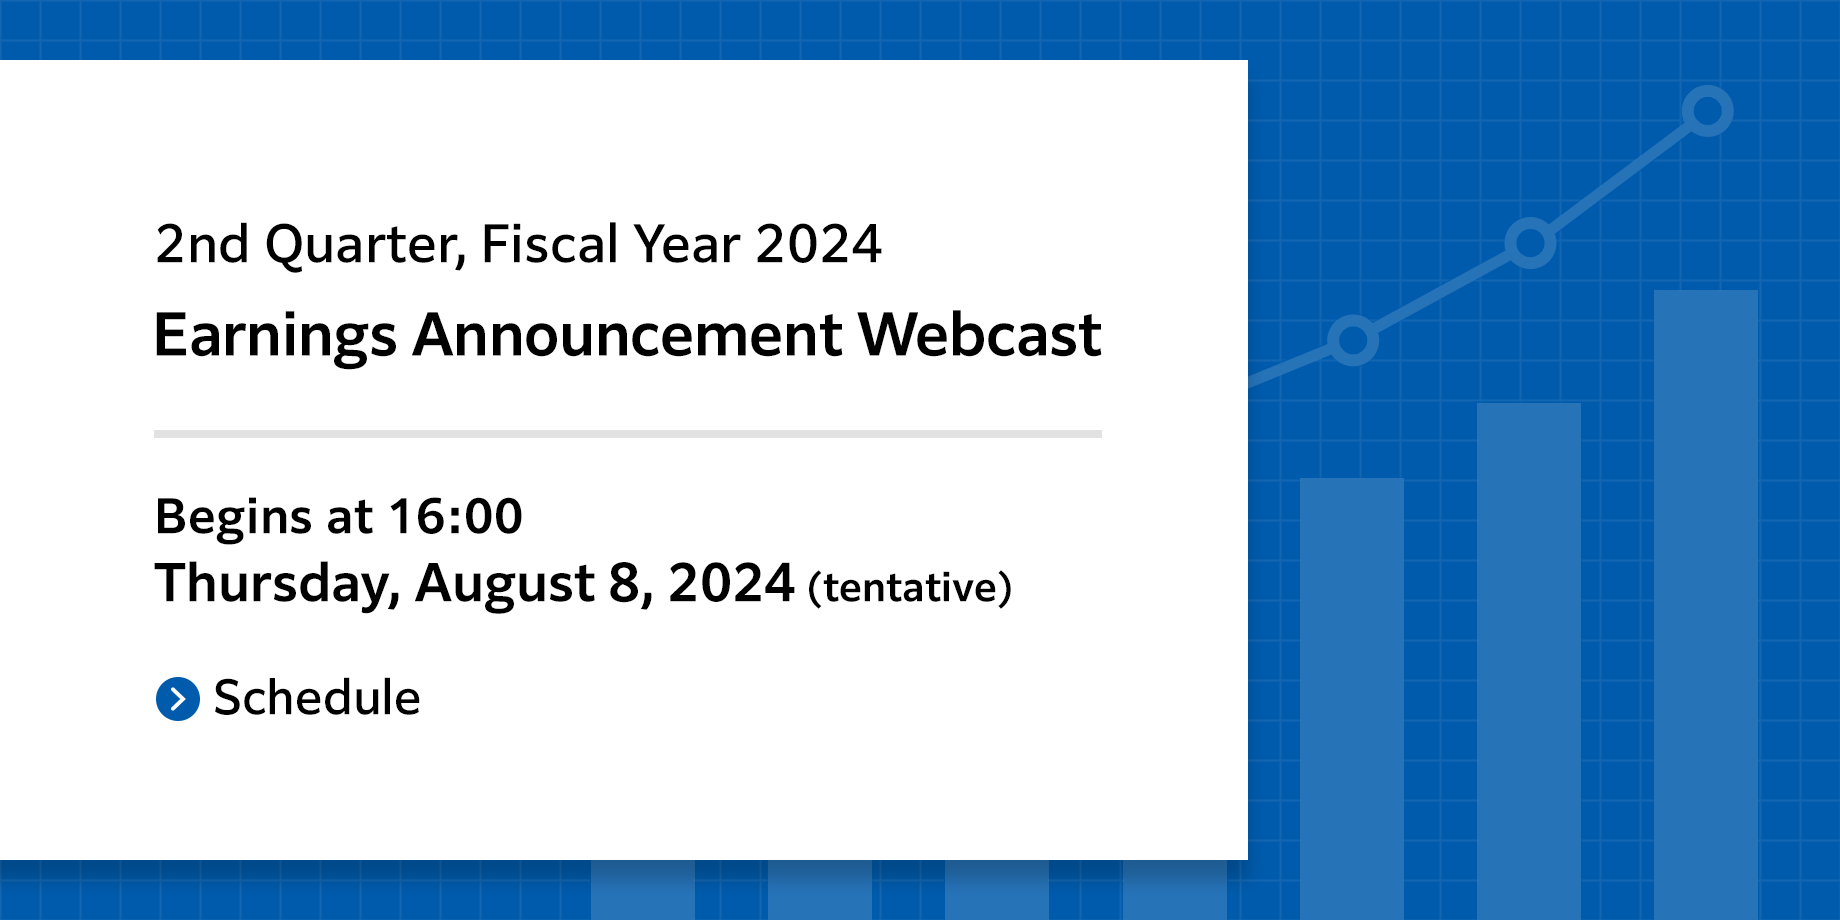 2nd Quarter, Fiscal Year 2024 Earnings Announcement Webcast - Thursday, August 8, 2024